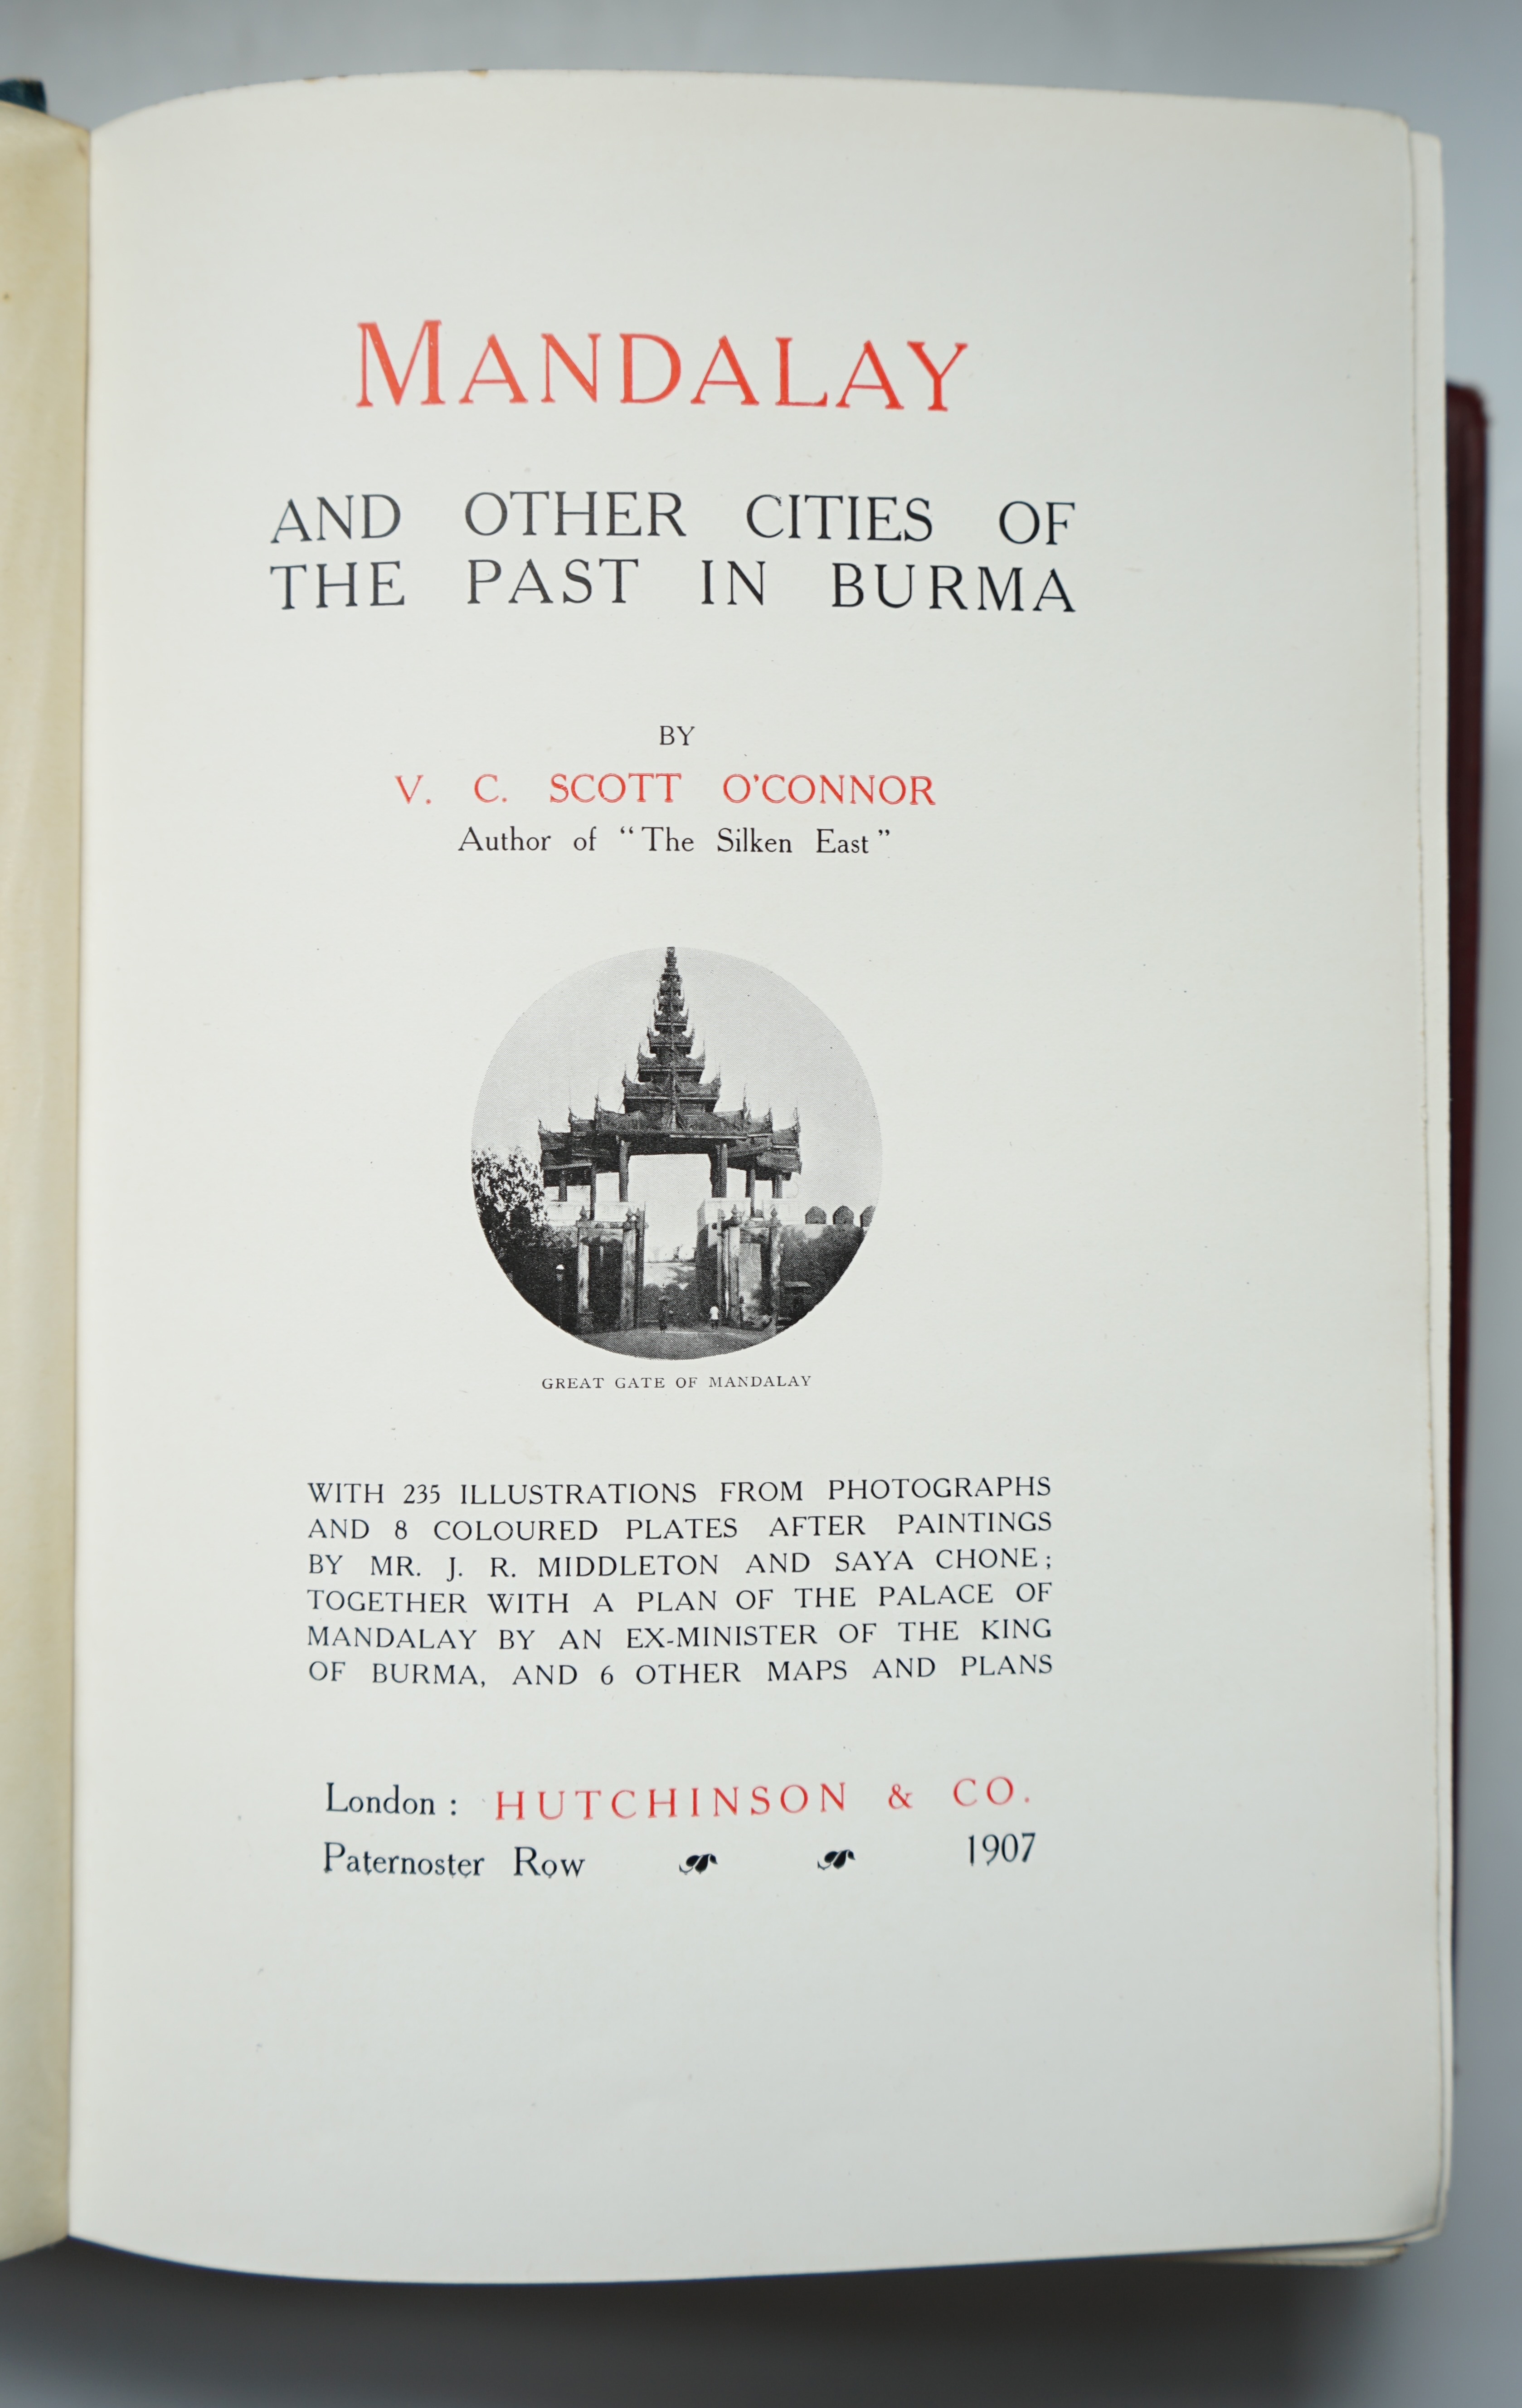 O’Connor. V.C.Scott - The Charm of Kashmir, 16 tipped-in colour plates, 24 plates after photographs, 4to, publisher's cream buckram gilt, lightly soiled, Longmans, Green and Co., London, 1920; Ibid - Mandalay and other C